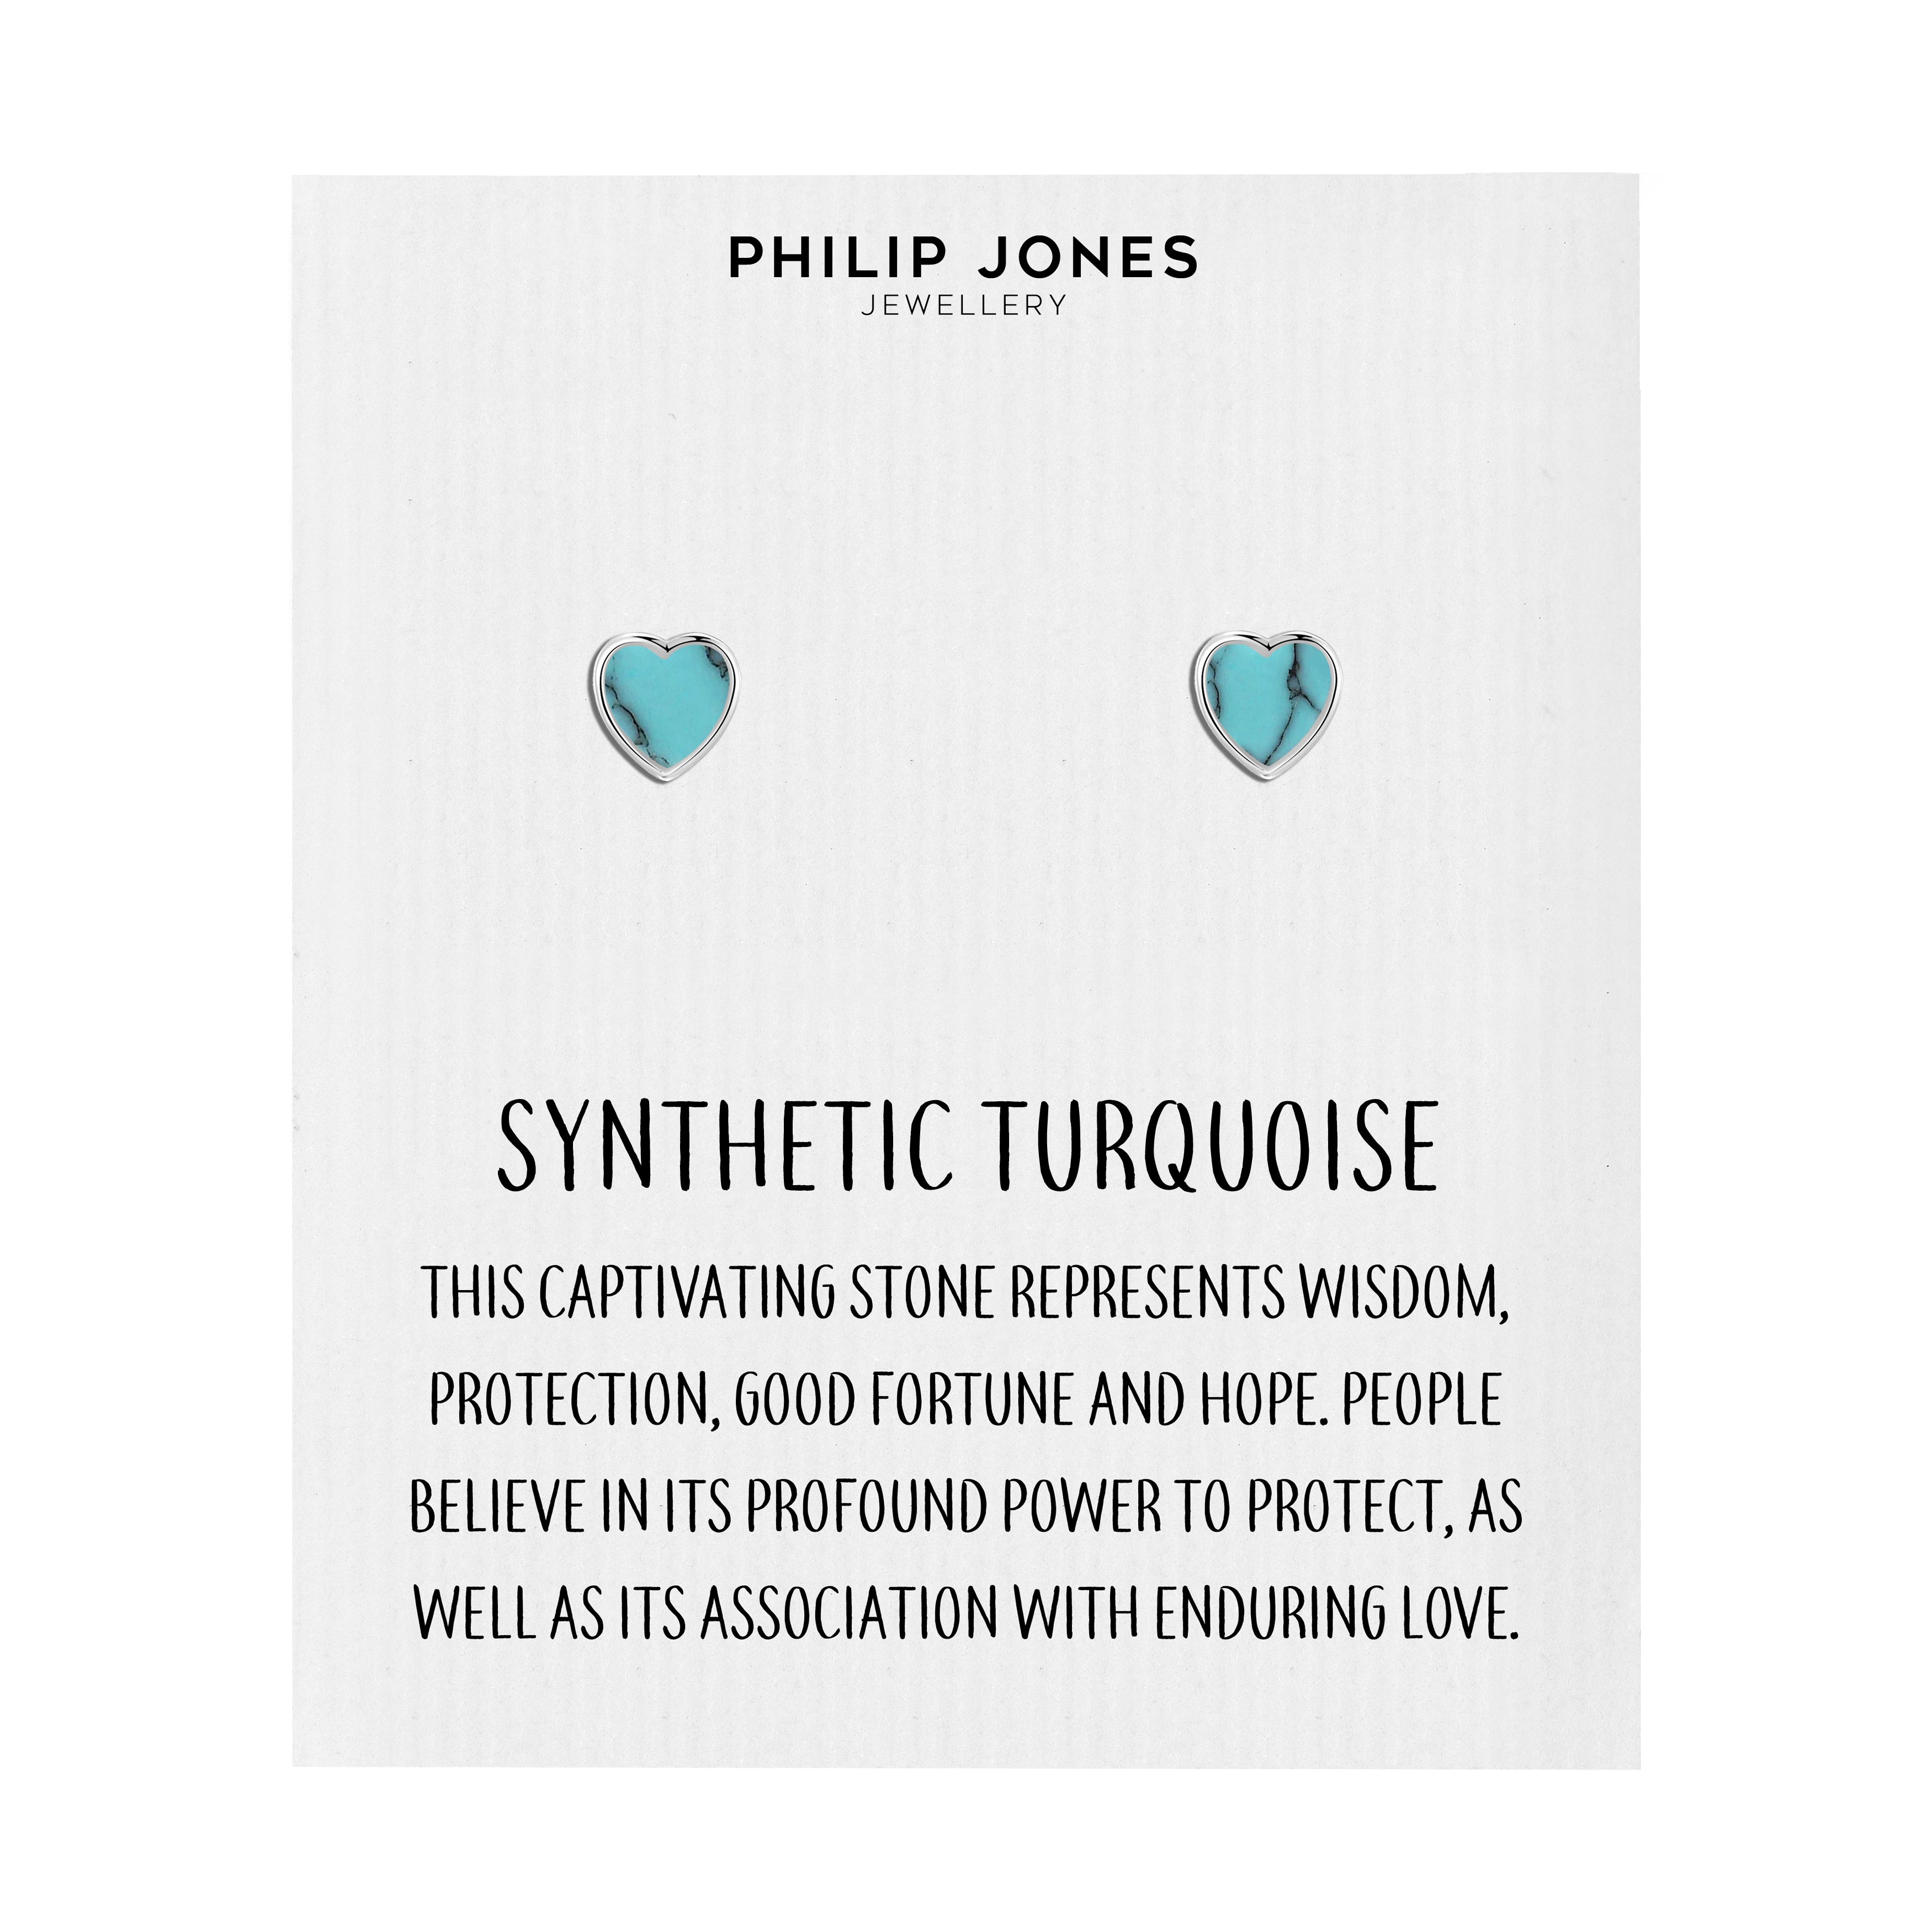 Synthetic Turquoise Heart Stud Earrings with Quote Card by Philip Jones Jewellery